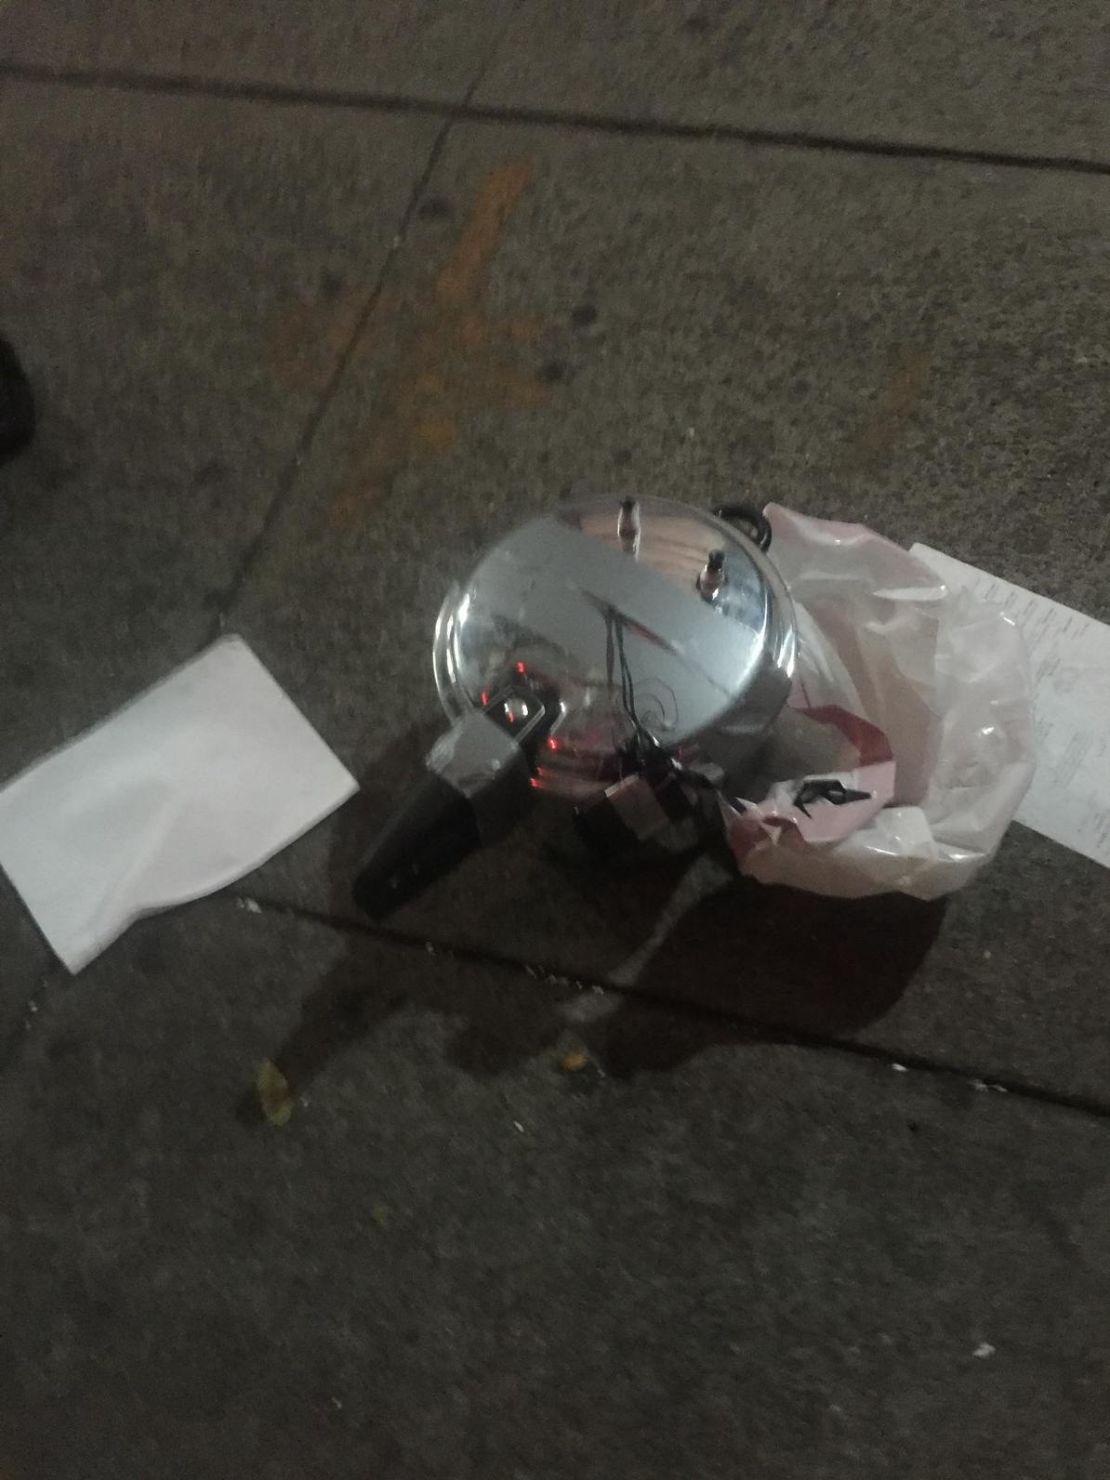 A device found at a second location in New York's Chelsea appears to be a pressure cooker.